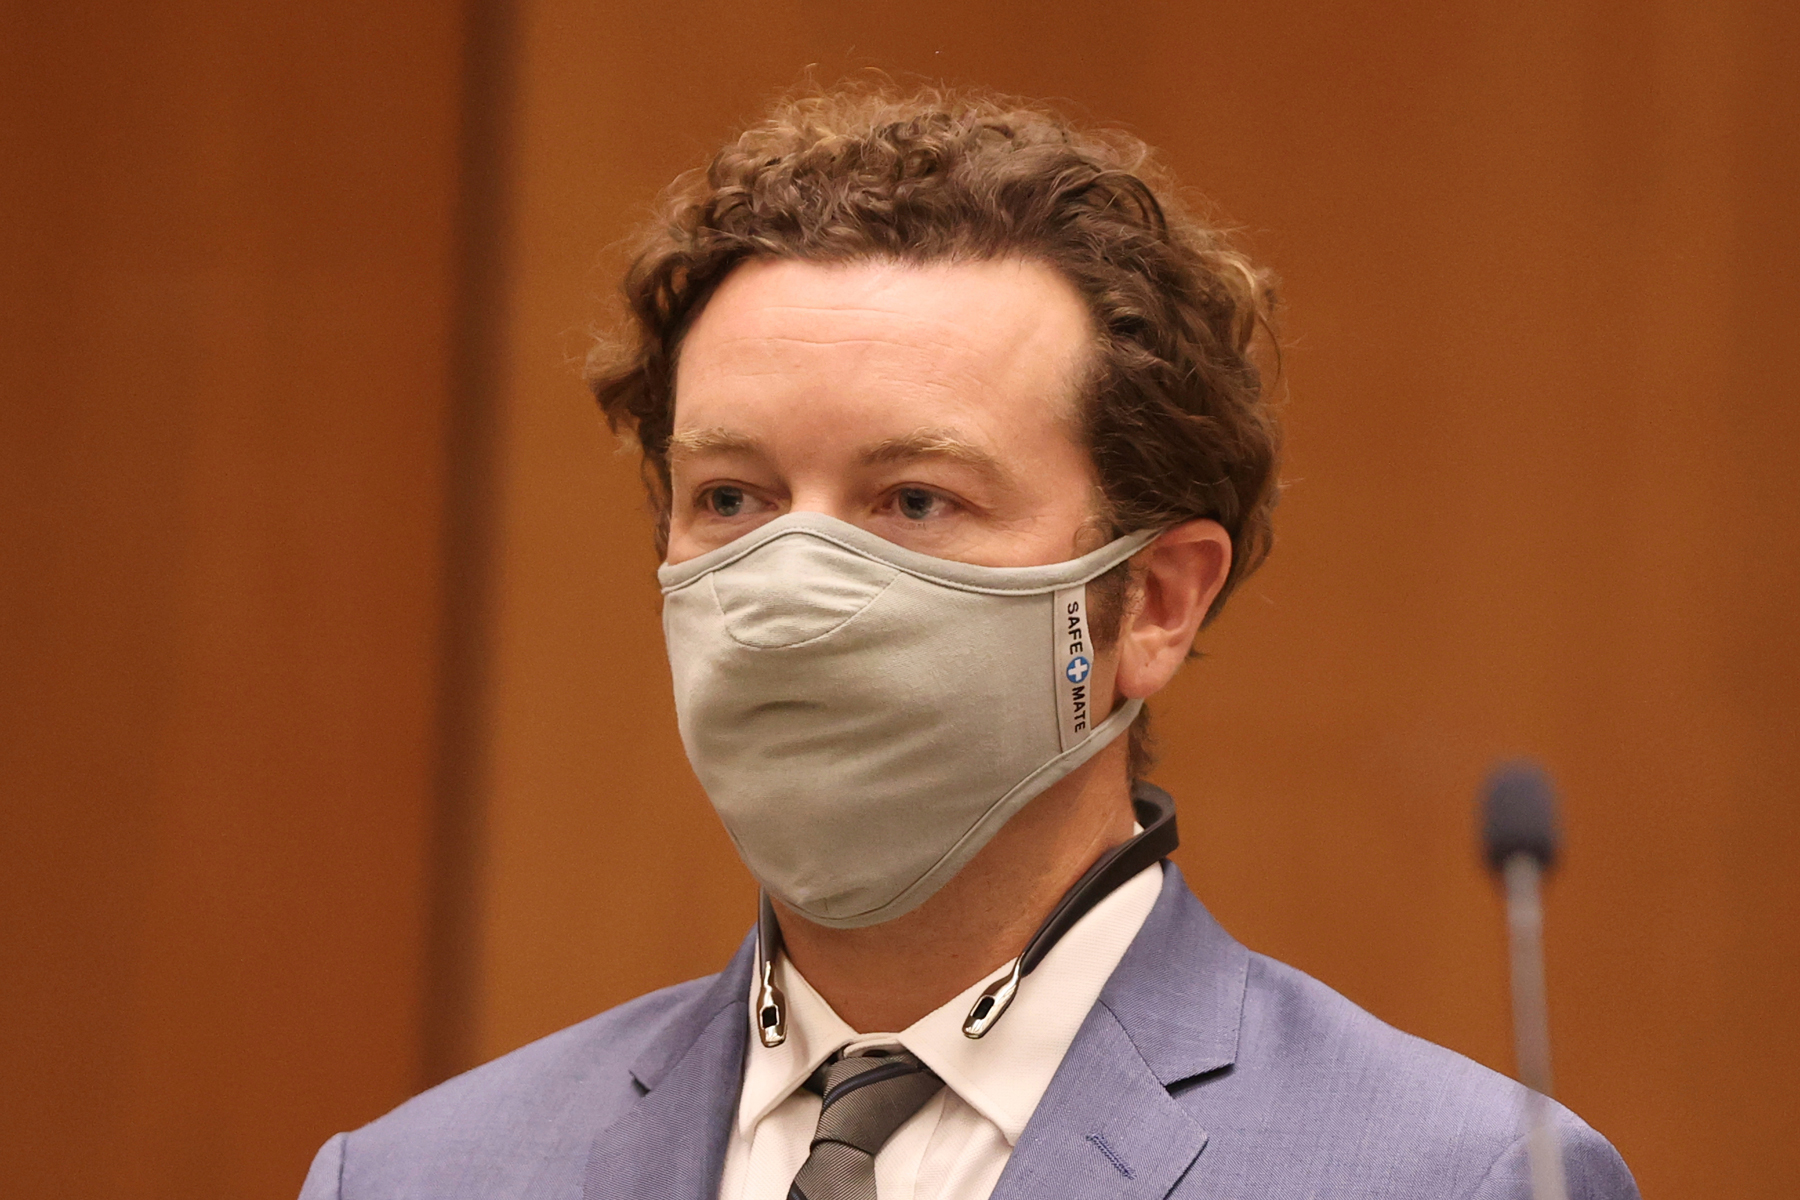 ‘That ’70s Demonstrate’ Actor Danny Masterson to Stand Trial on Rape Charges